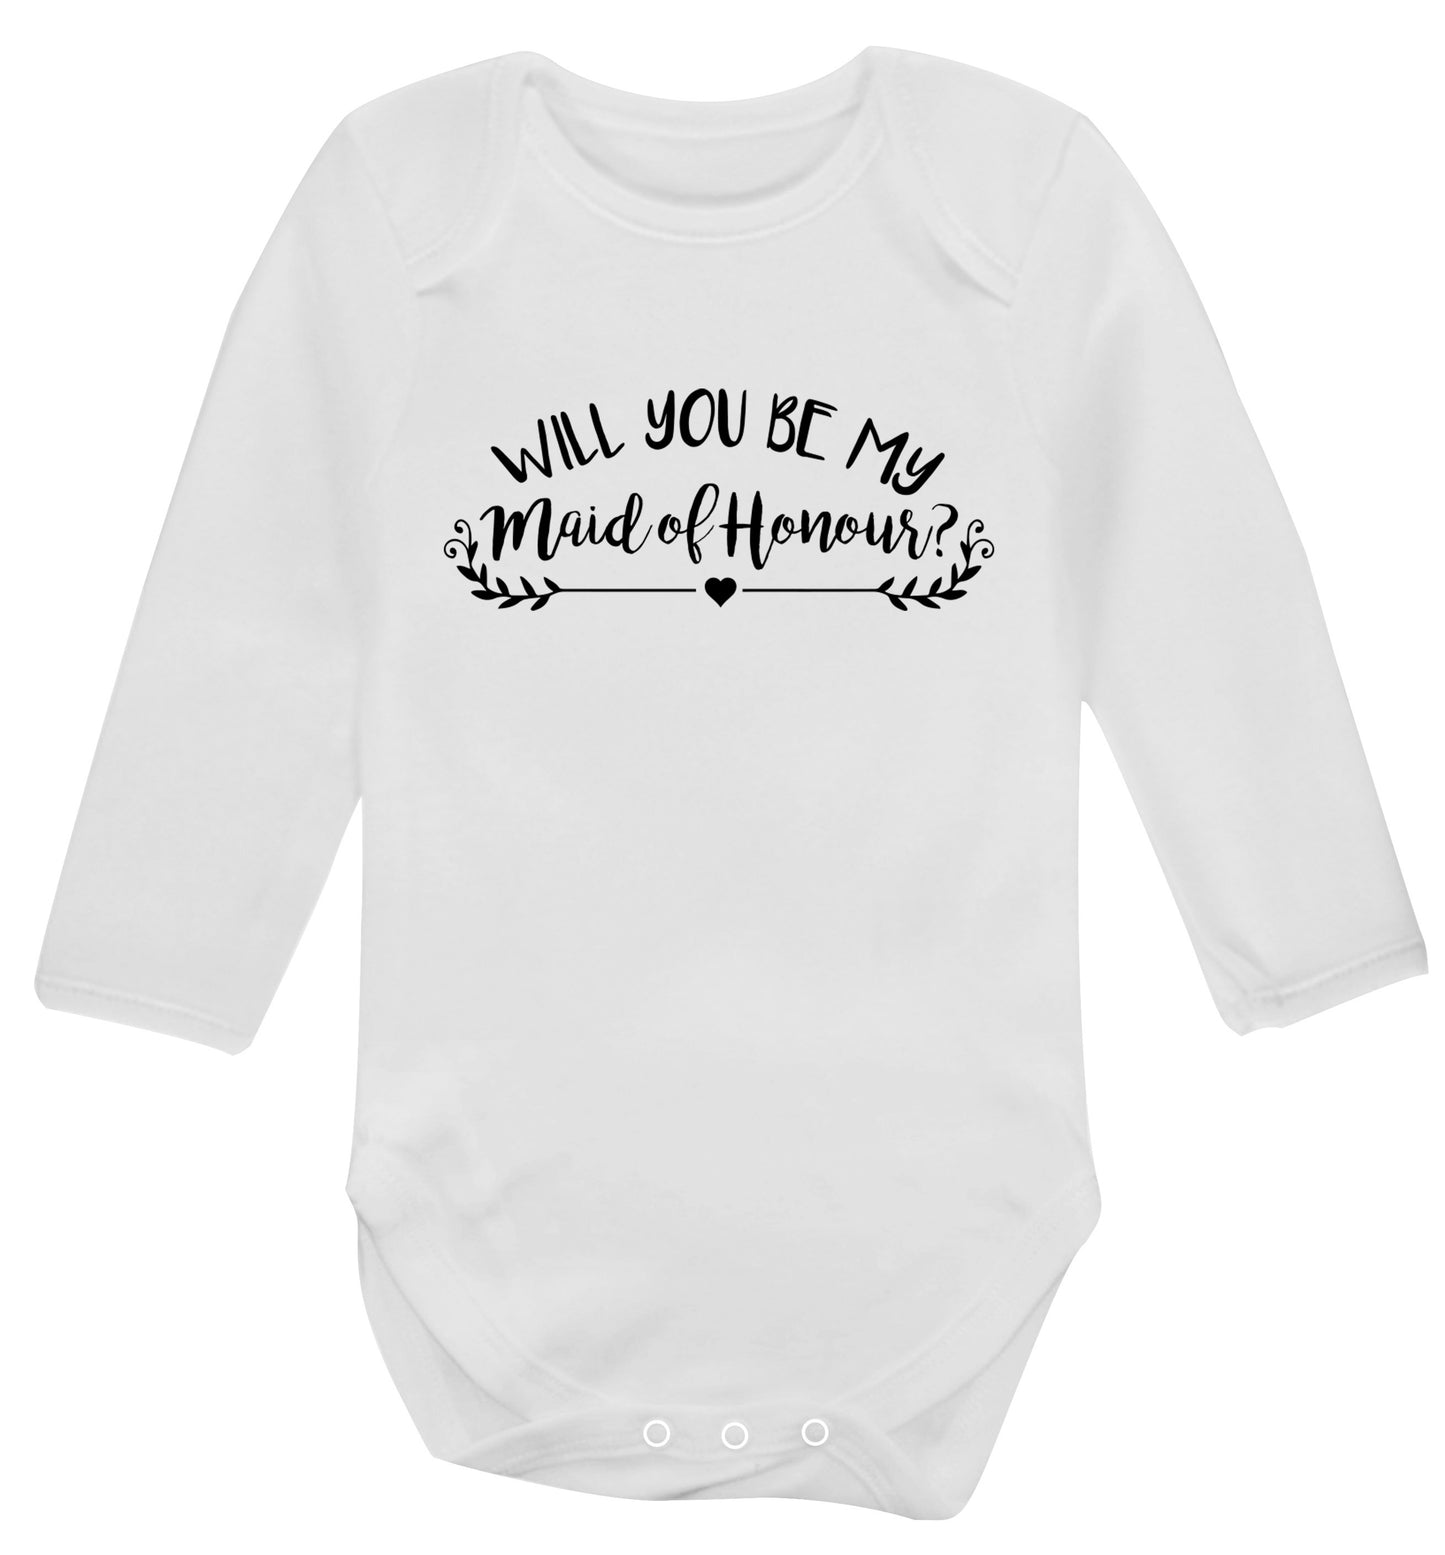 Will you be my maid of honour? Baby Vest long sleeved white 6-12 months